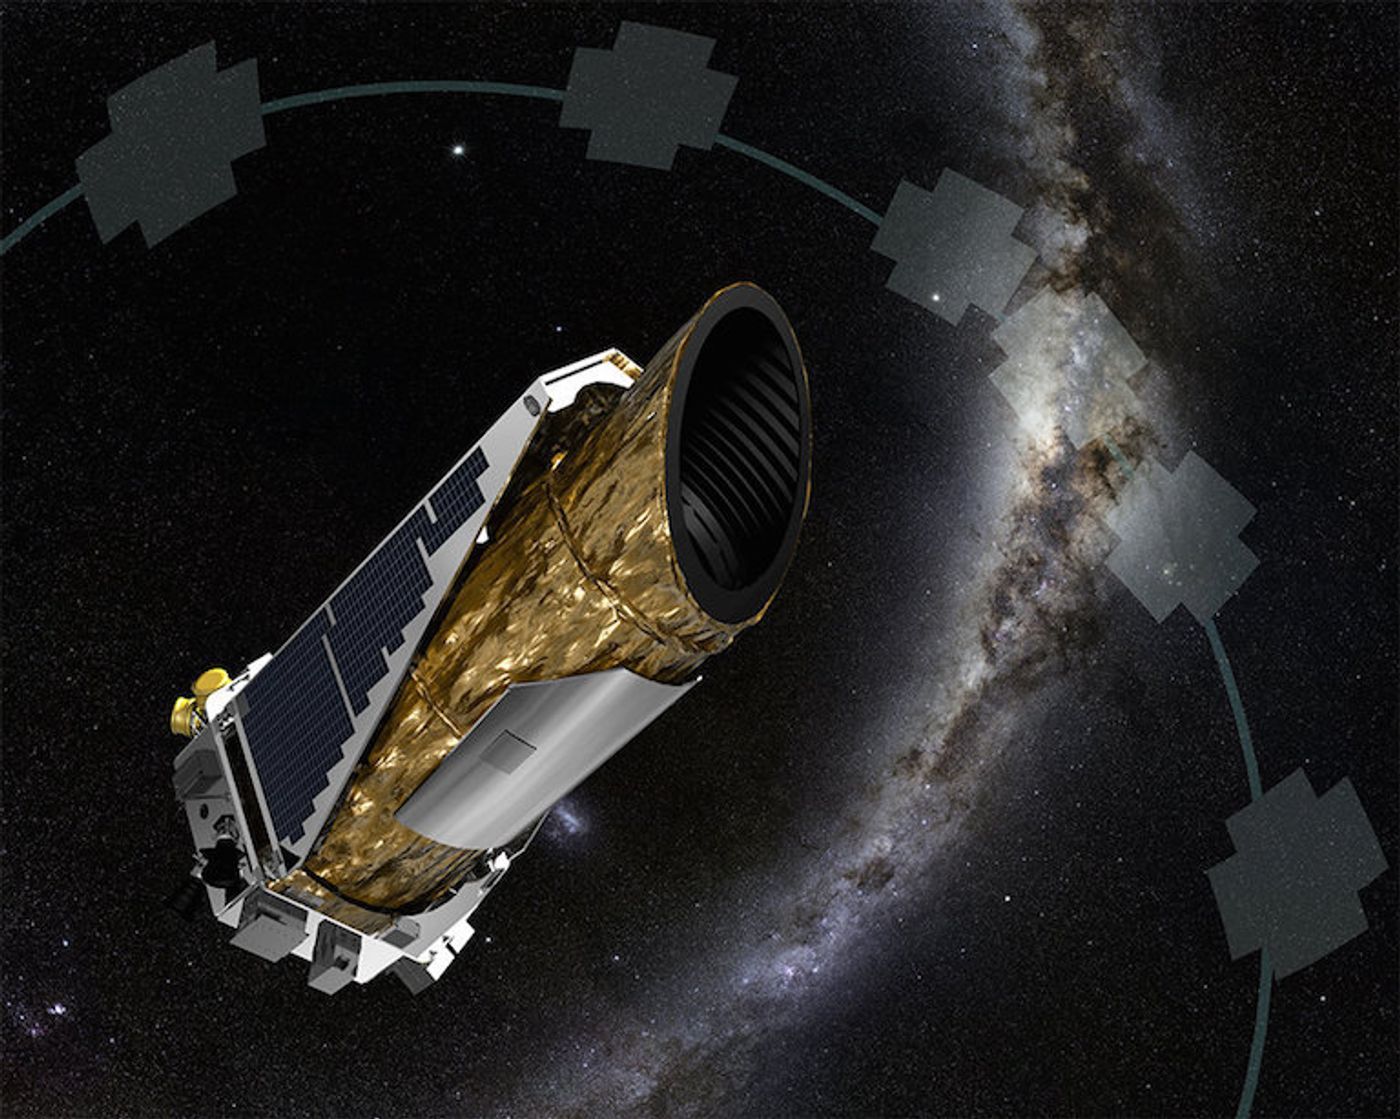 An artist's impression of the now-retired Kepler Space Telescope.